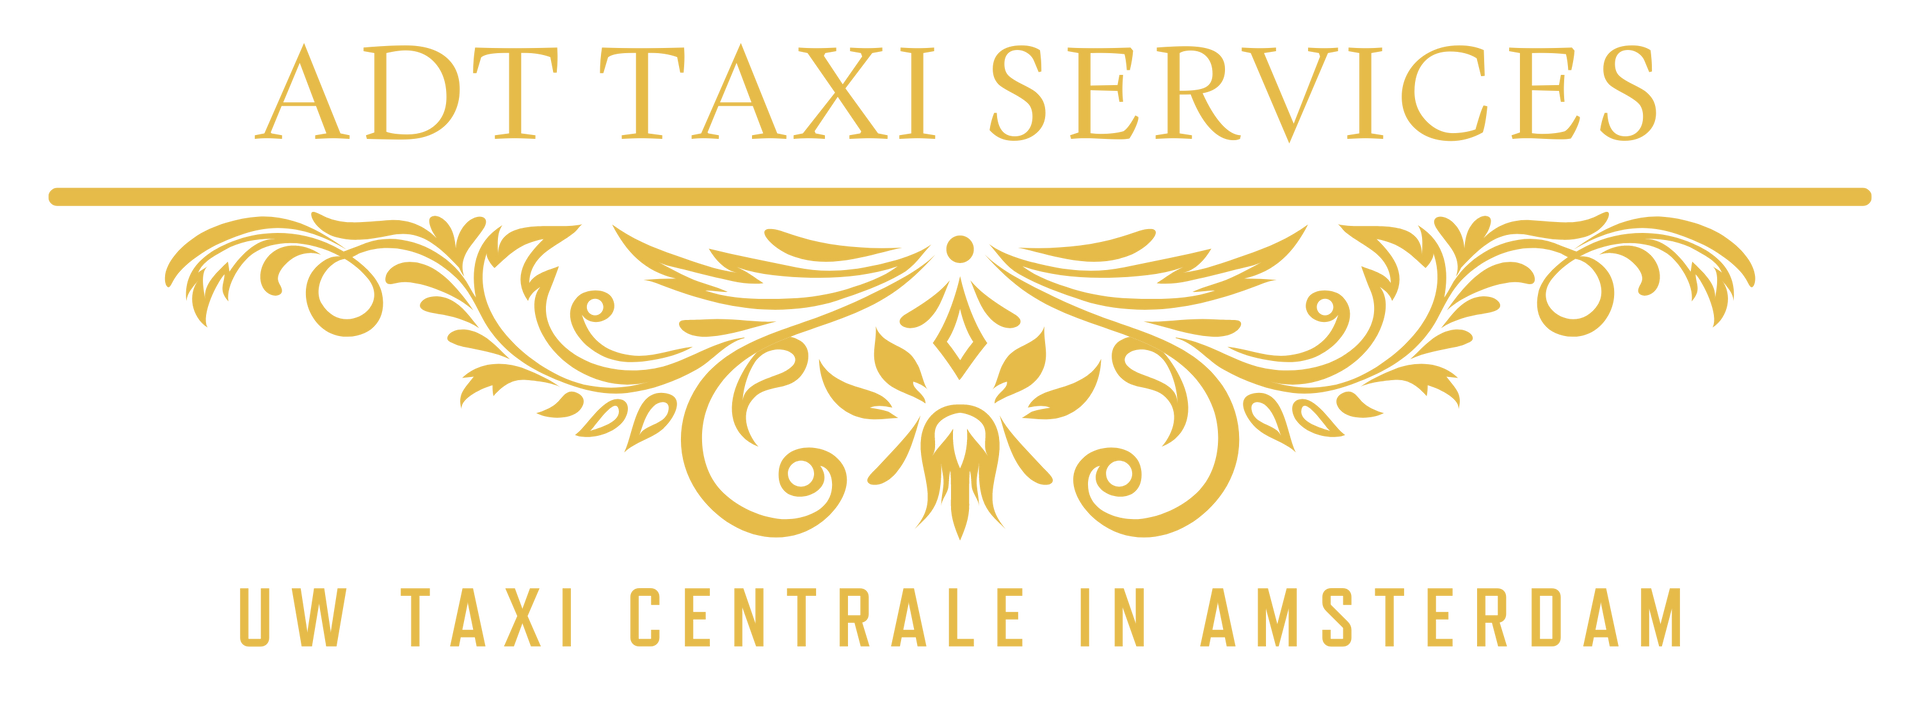 ADT Taxi Amsterdam taxi Amsterdam ADT France